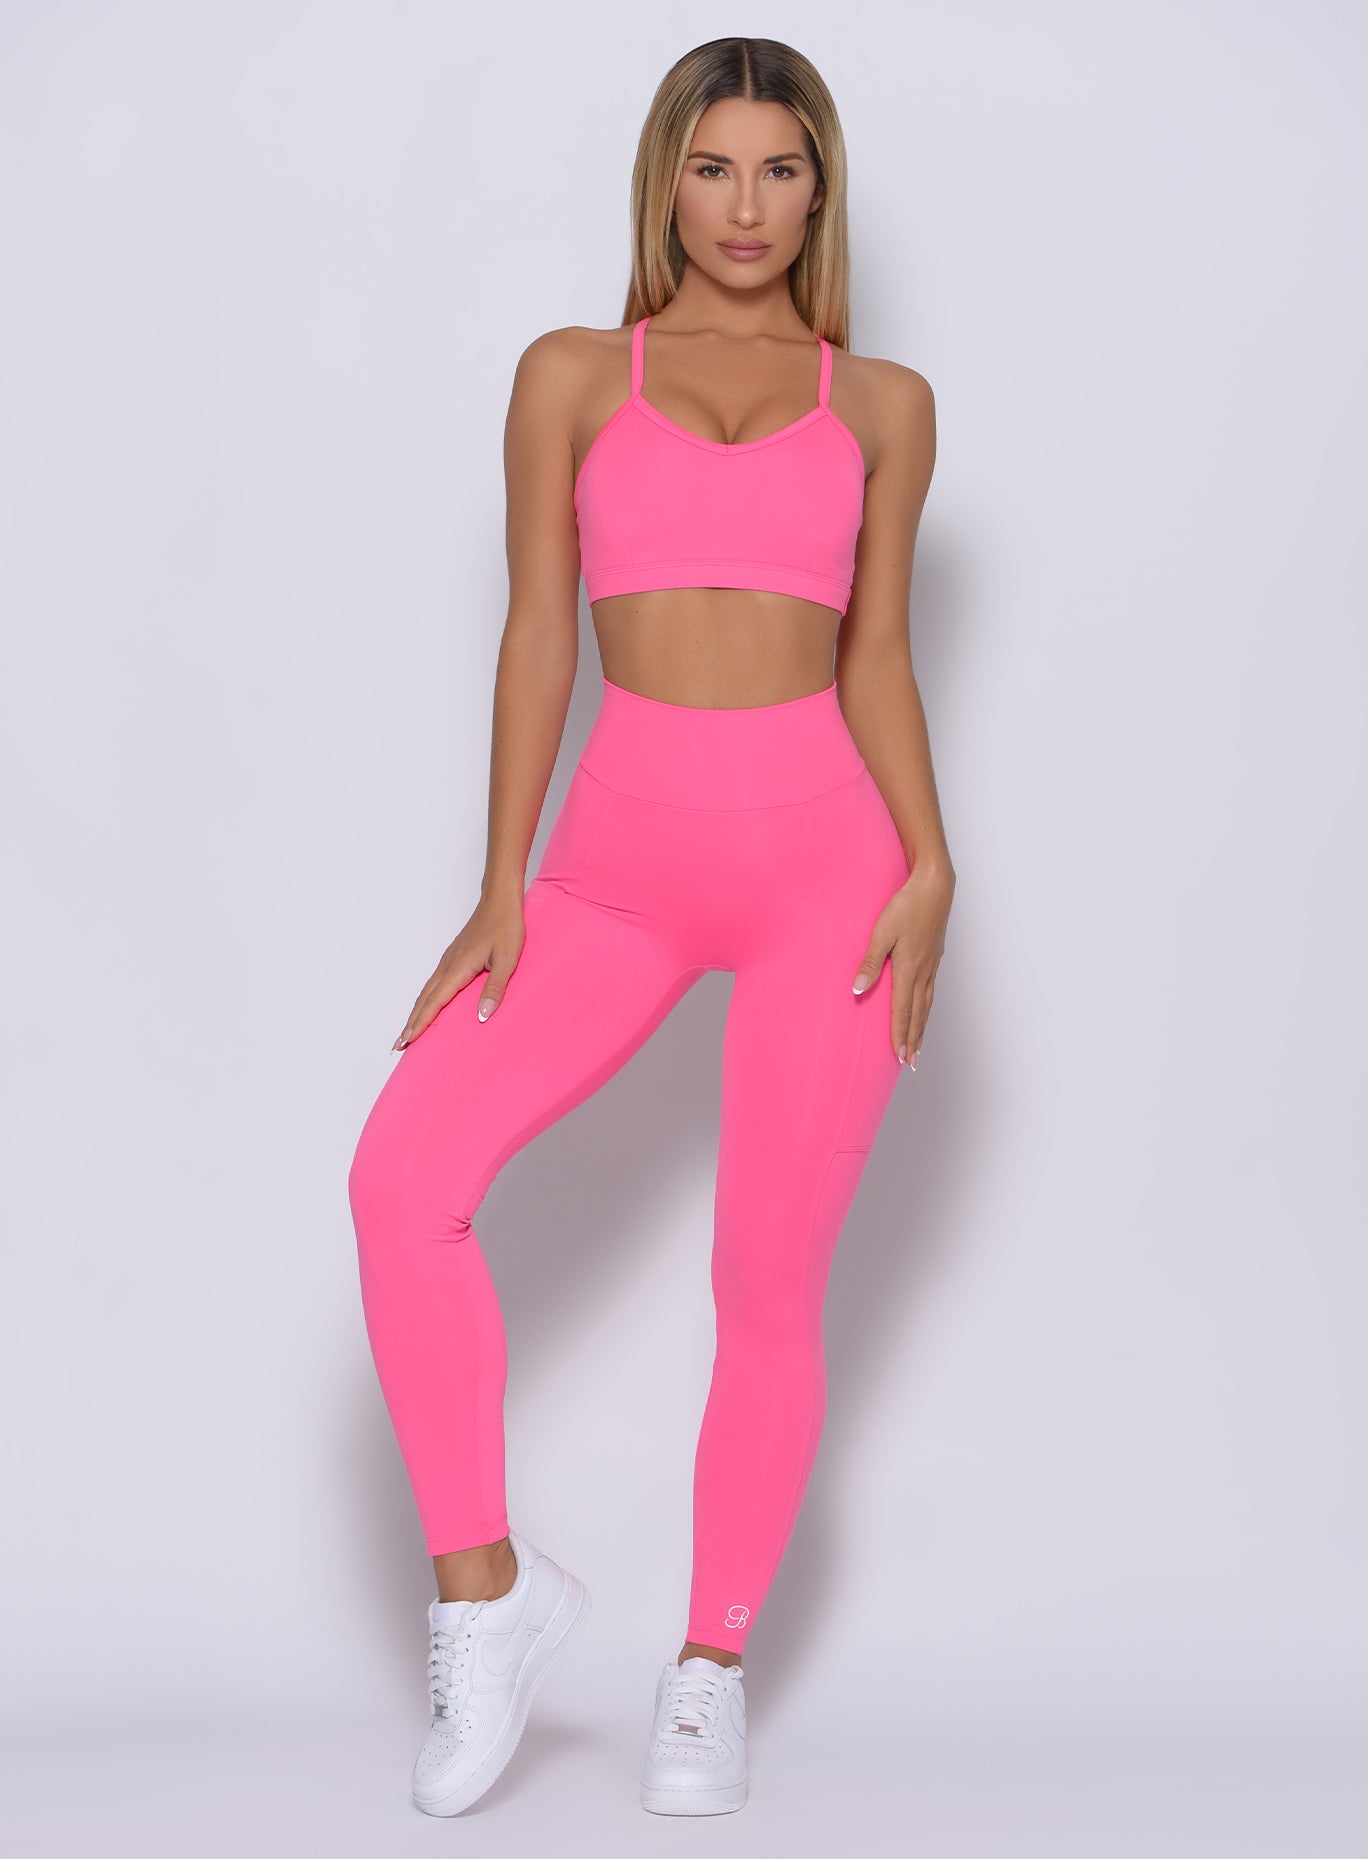 Front profile view of the model in our curves leggings in party pink color and a matching bra